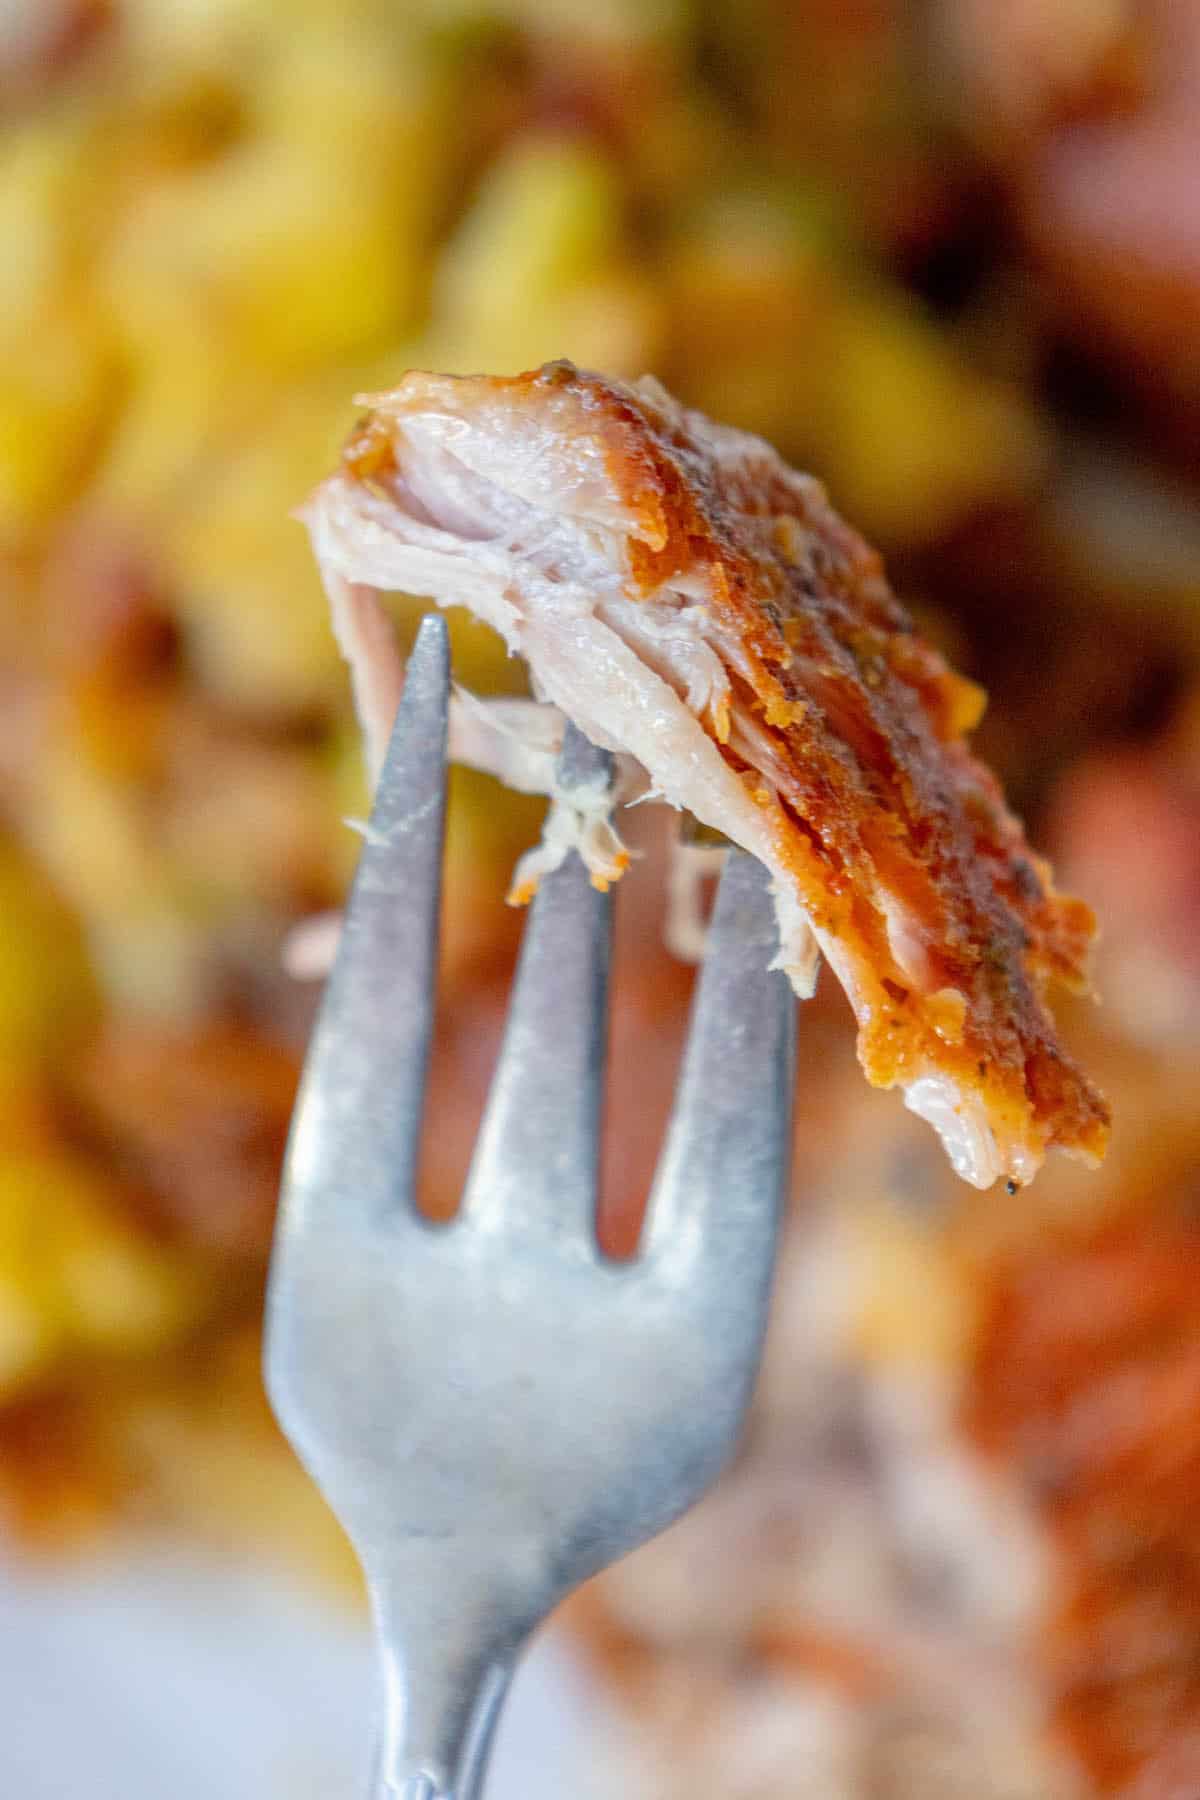 A Polish-style fork with a piece of Country Style Ribs on it.